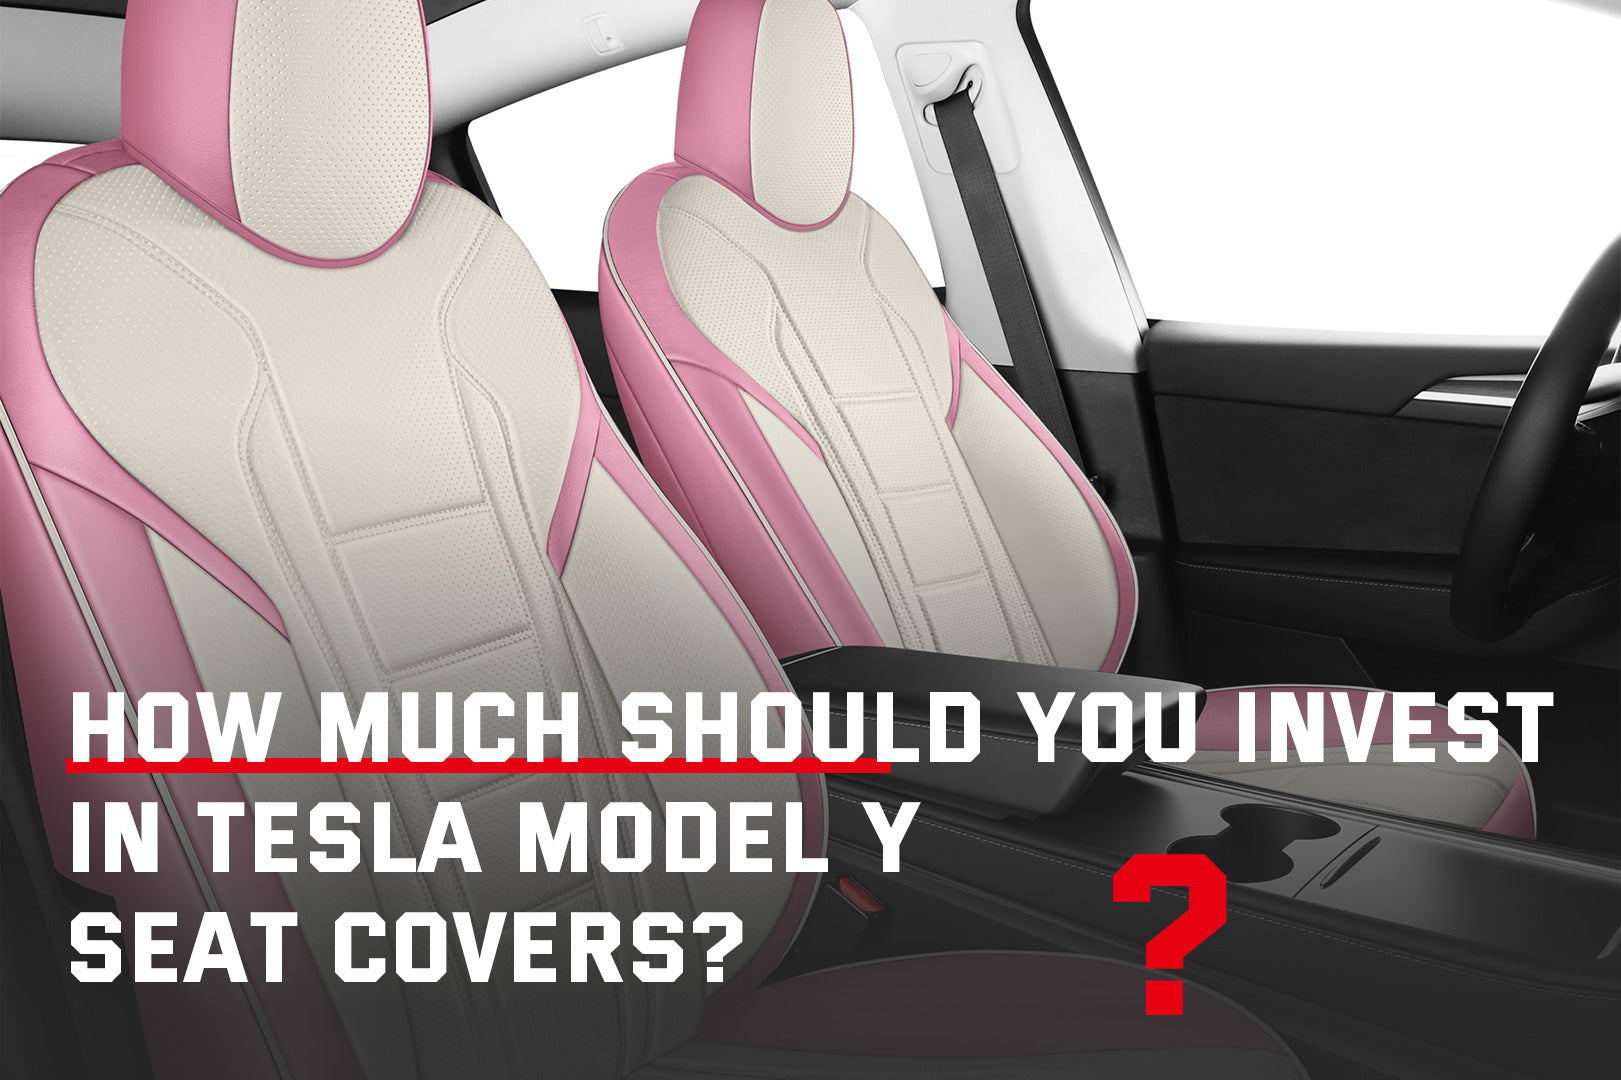 How Much Should You Invest in Tesla Model Y Seat Covers?